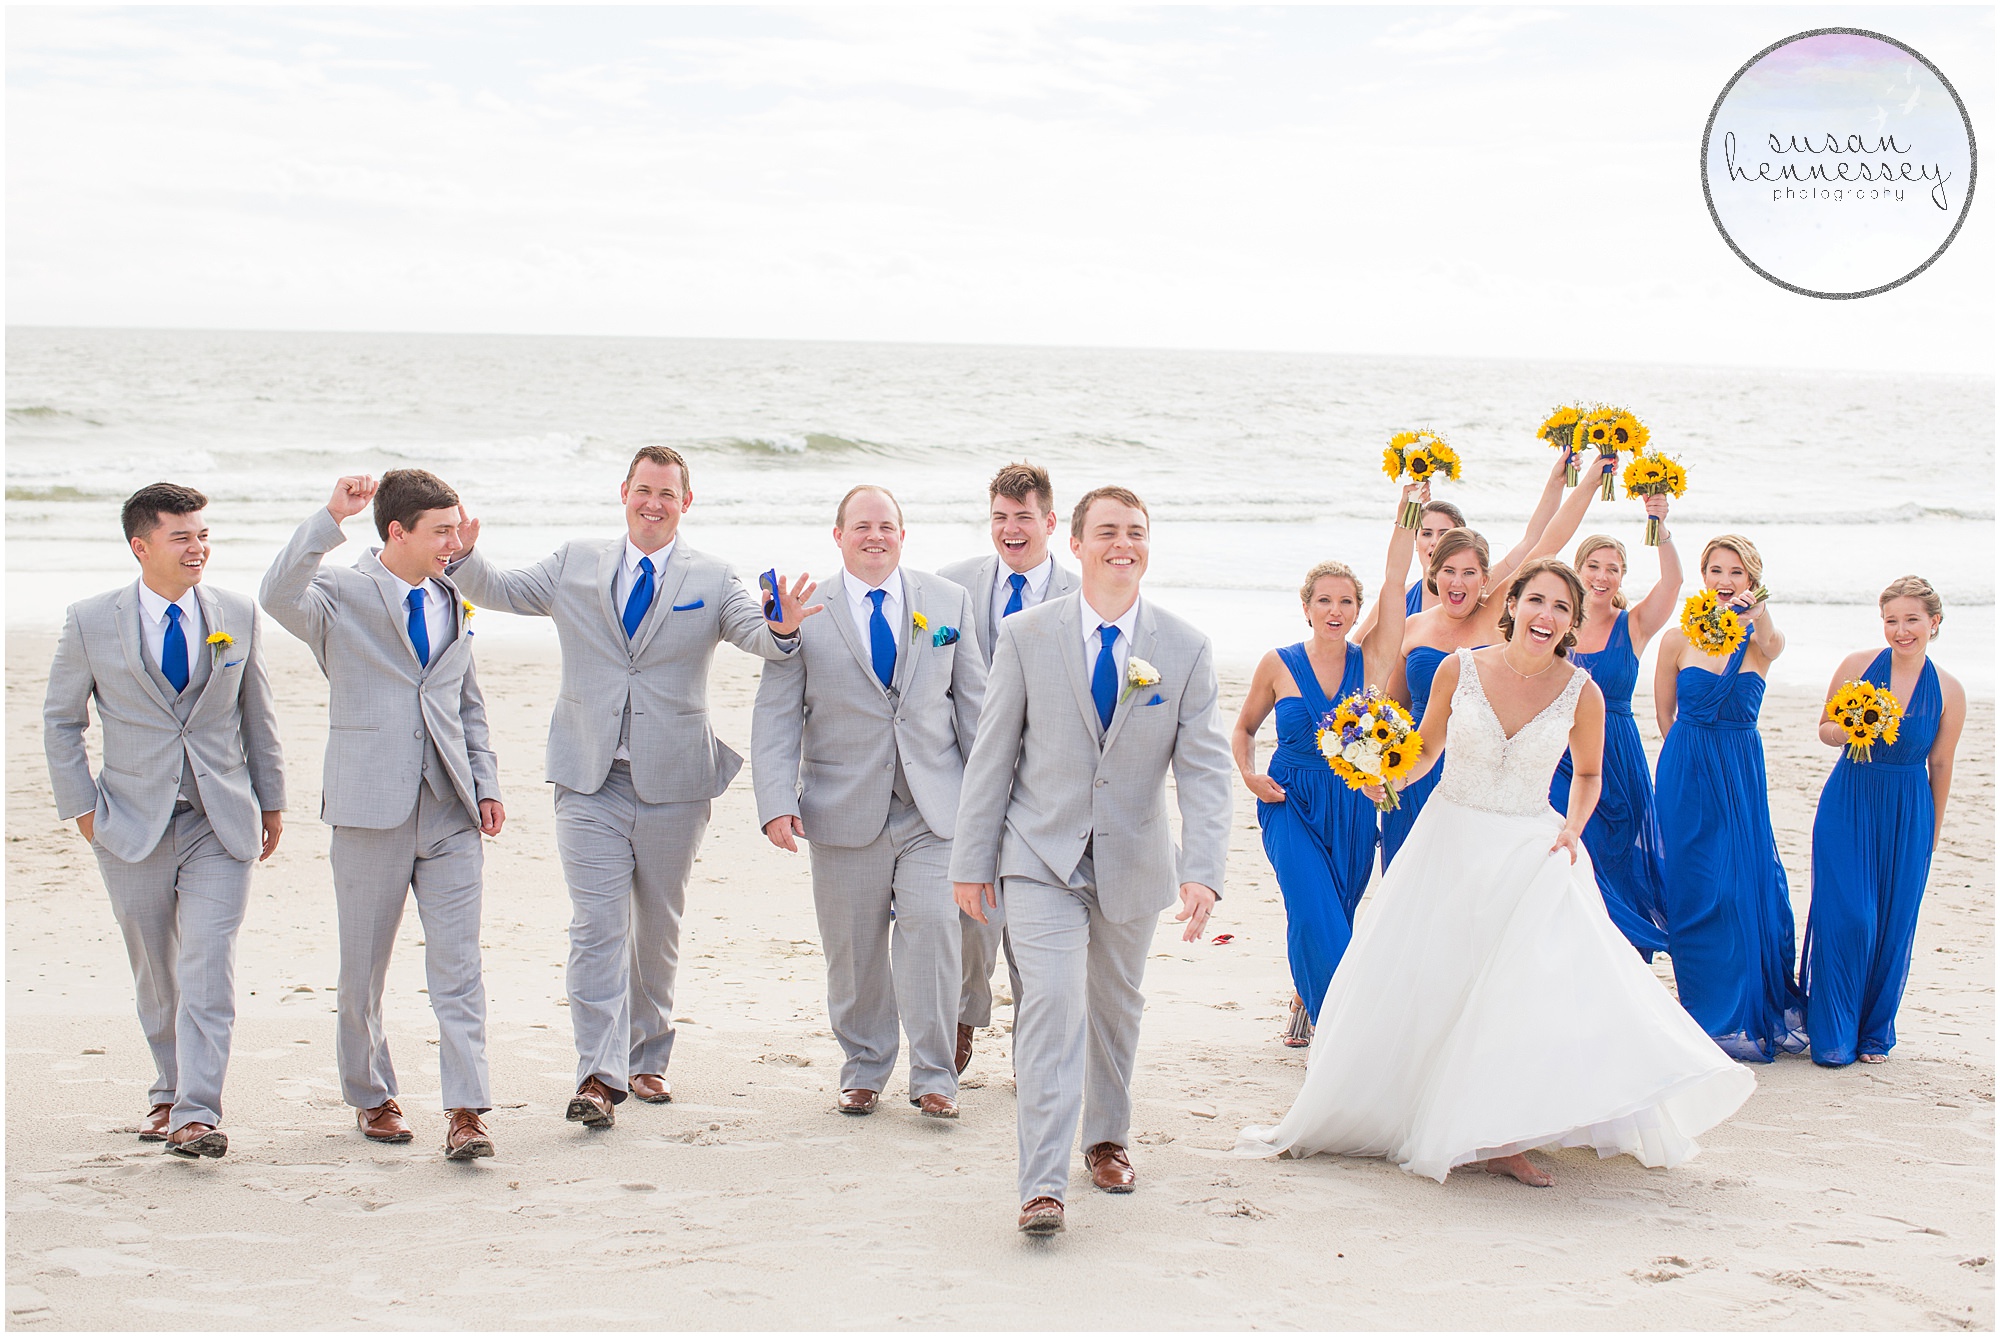 Bridal party on the beach at their Jersey Shore wedding in Cape May.